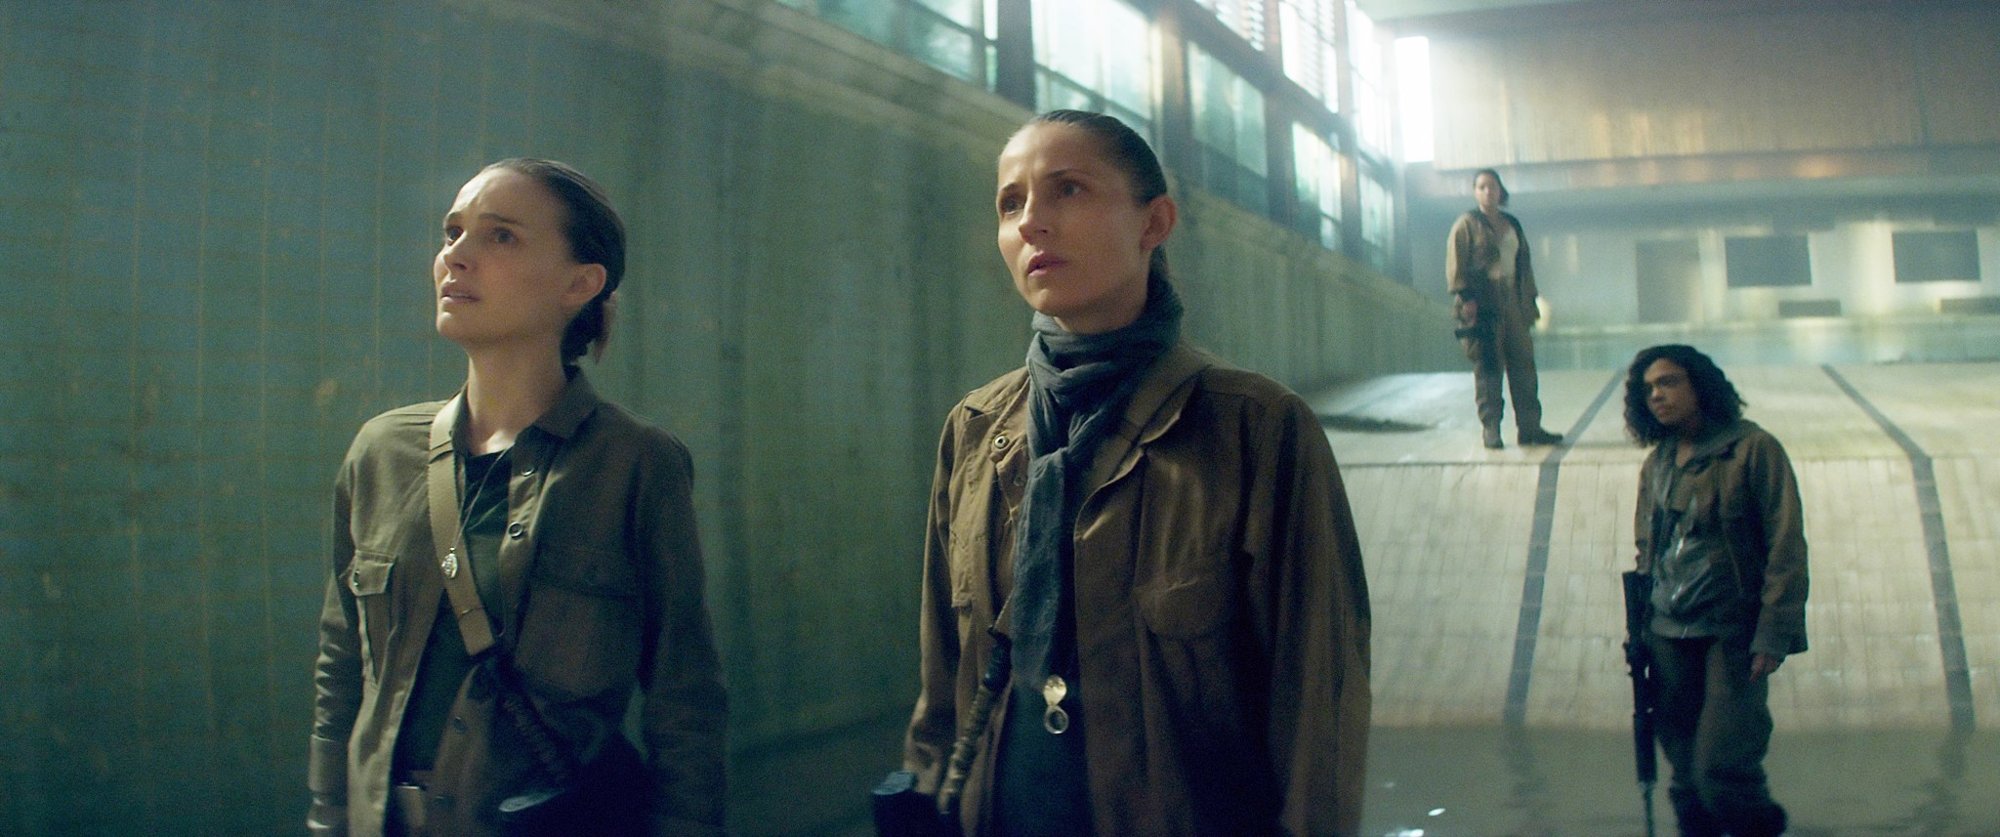 Natalie Portman stars as Lena and Tuva Novotny stars as Cass Sheppard in Paramount Pictures' Annihilation (2018)